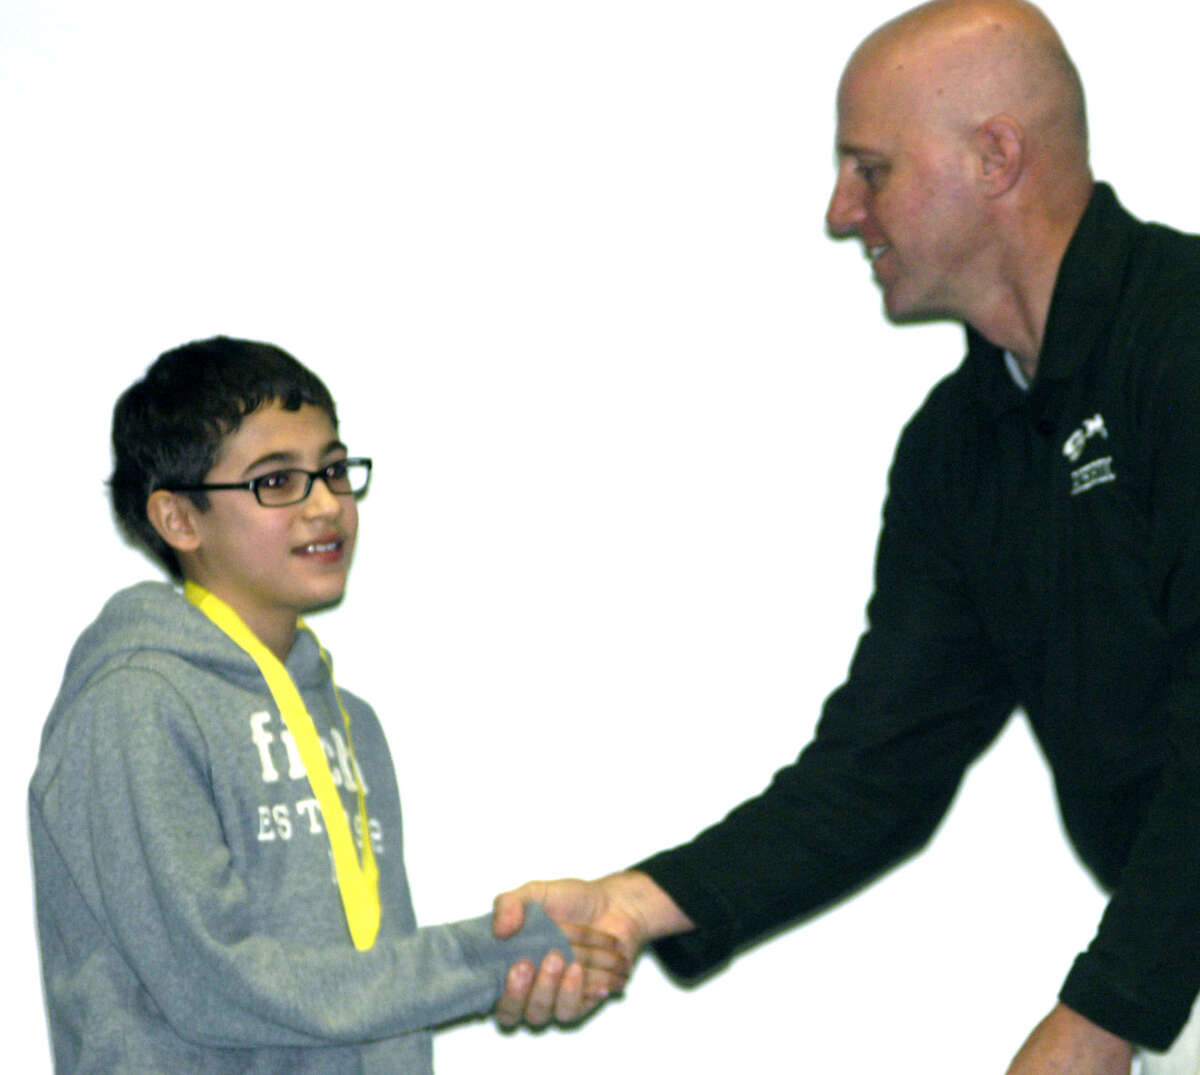 Nick Edwards, a seventh-grade student at Schaghticoke Middle School in New Milford, accepts faculty moderator Rob Hibbard's congratulations after winning his school's edition of the National Geographic geography bee. Jan. 4, 2013